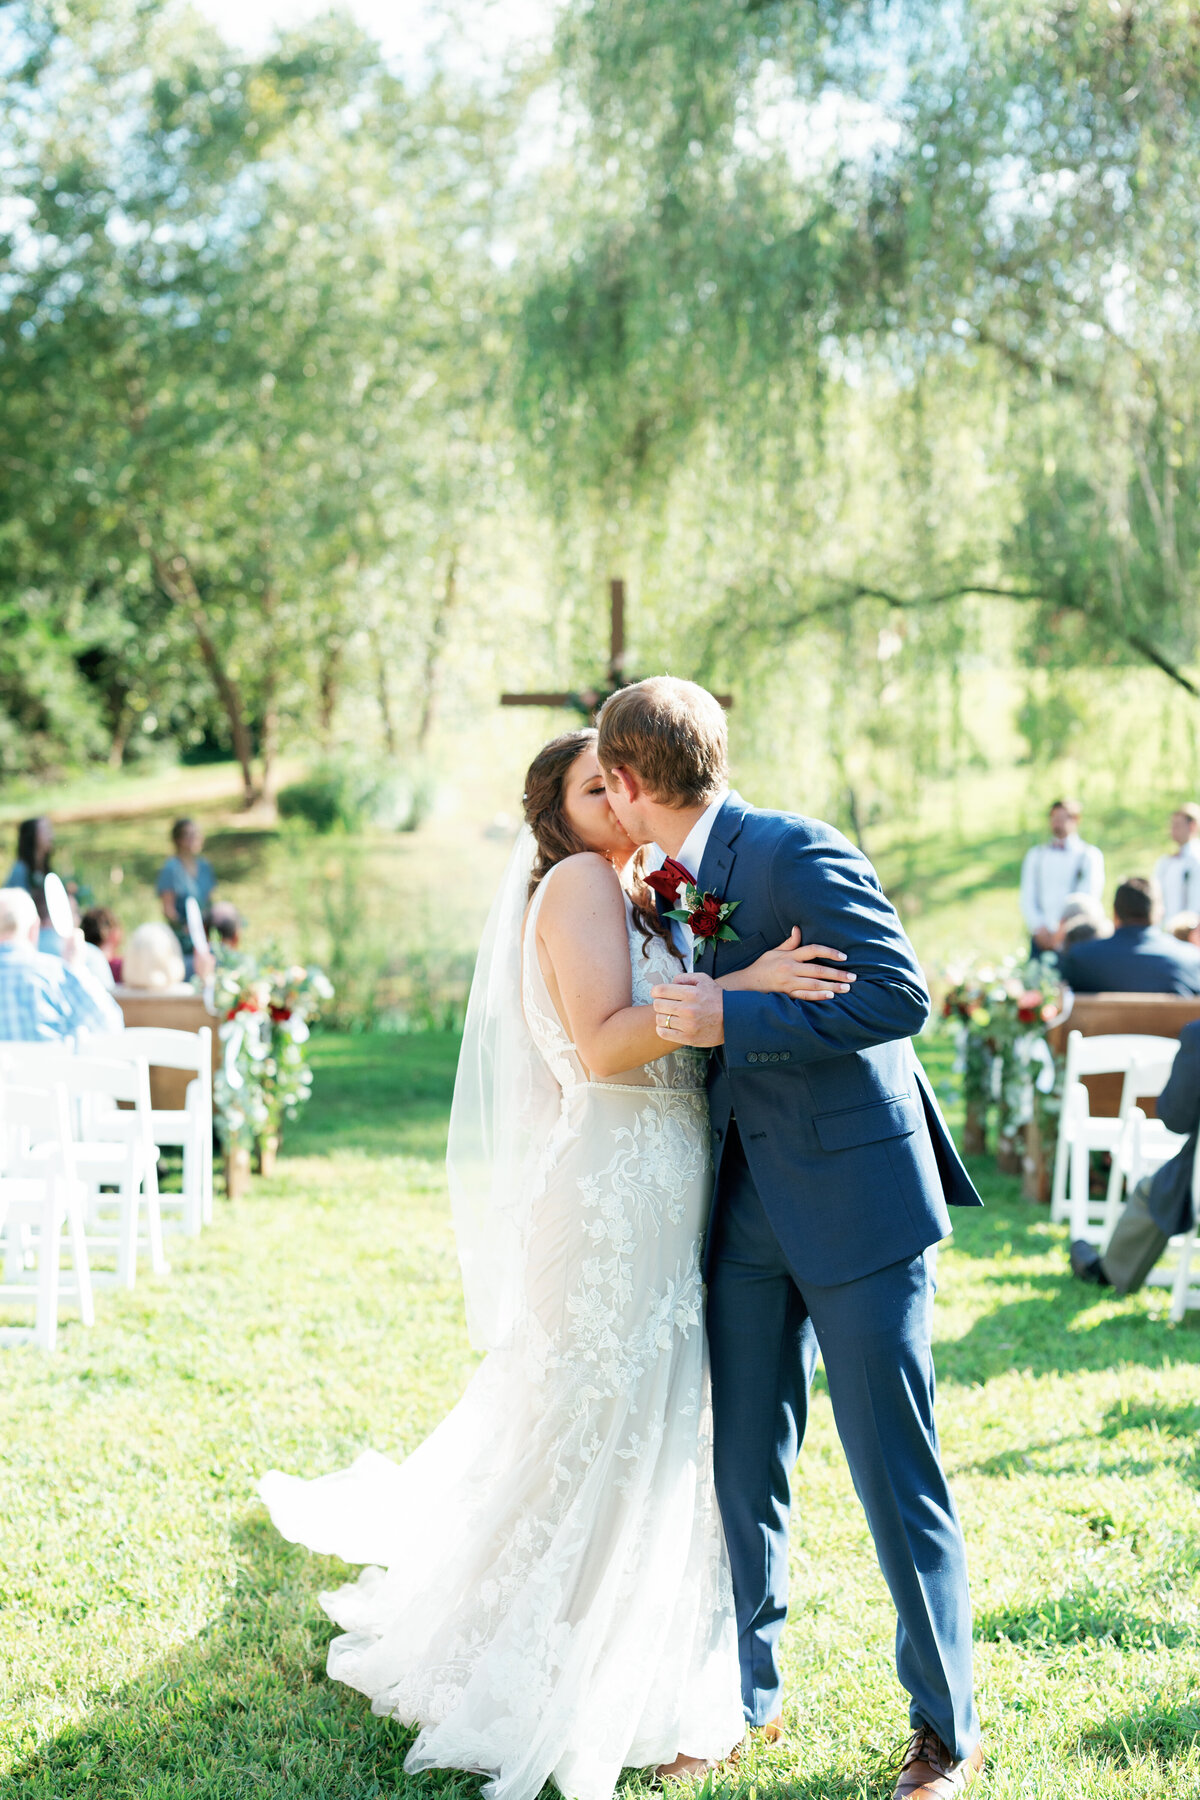 Alaina and Russ - Coopers Cove at Heritage Park - East Tennessee Wedding Photographer - Alaina René photography-1256